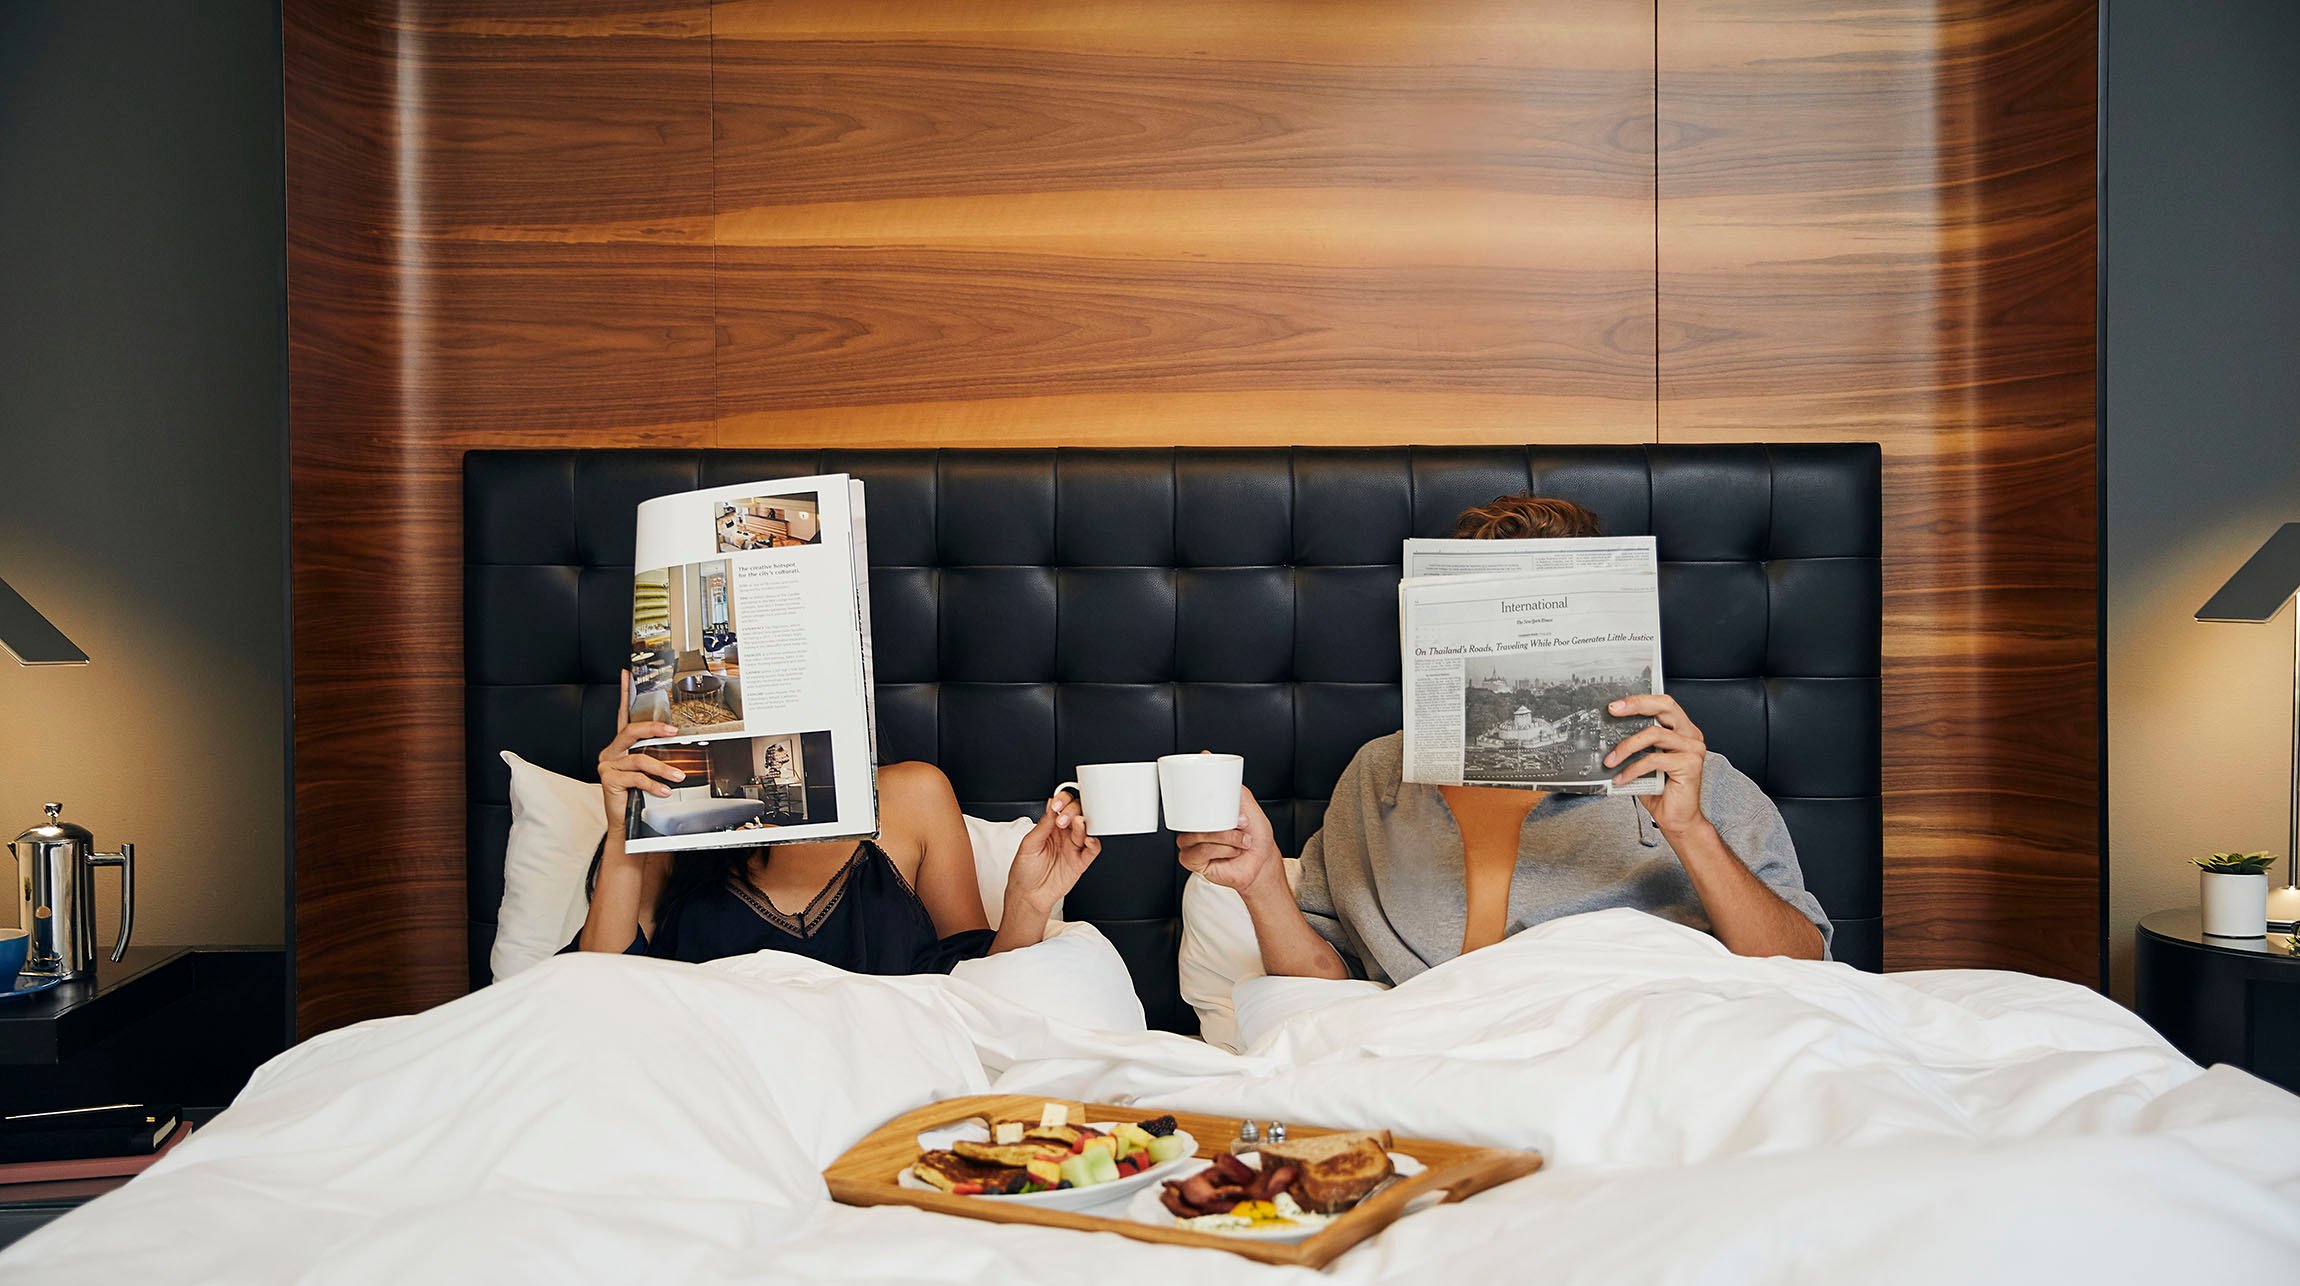 Couple in in Zetta Hotel bed, reading magazines, while having breakfast in bed.